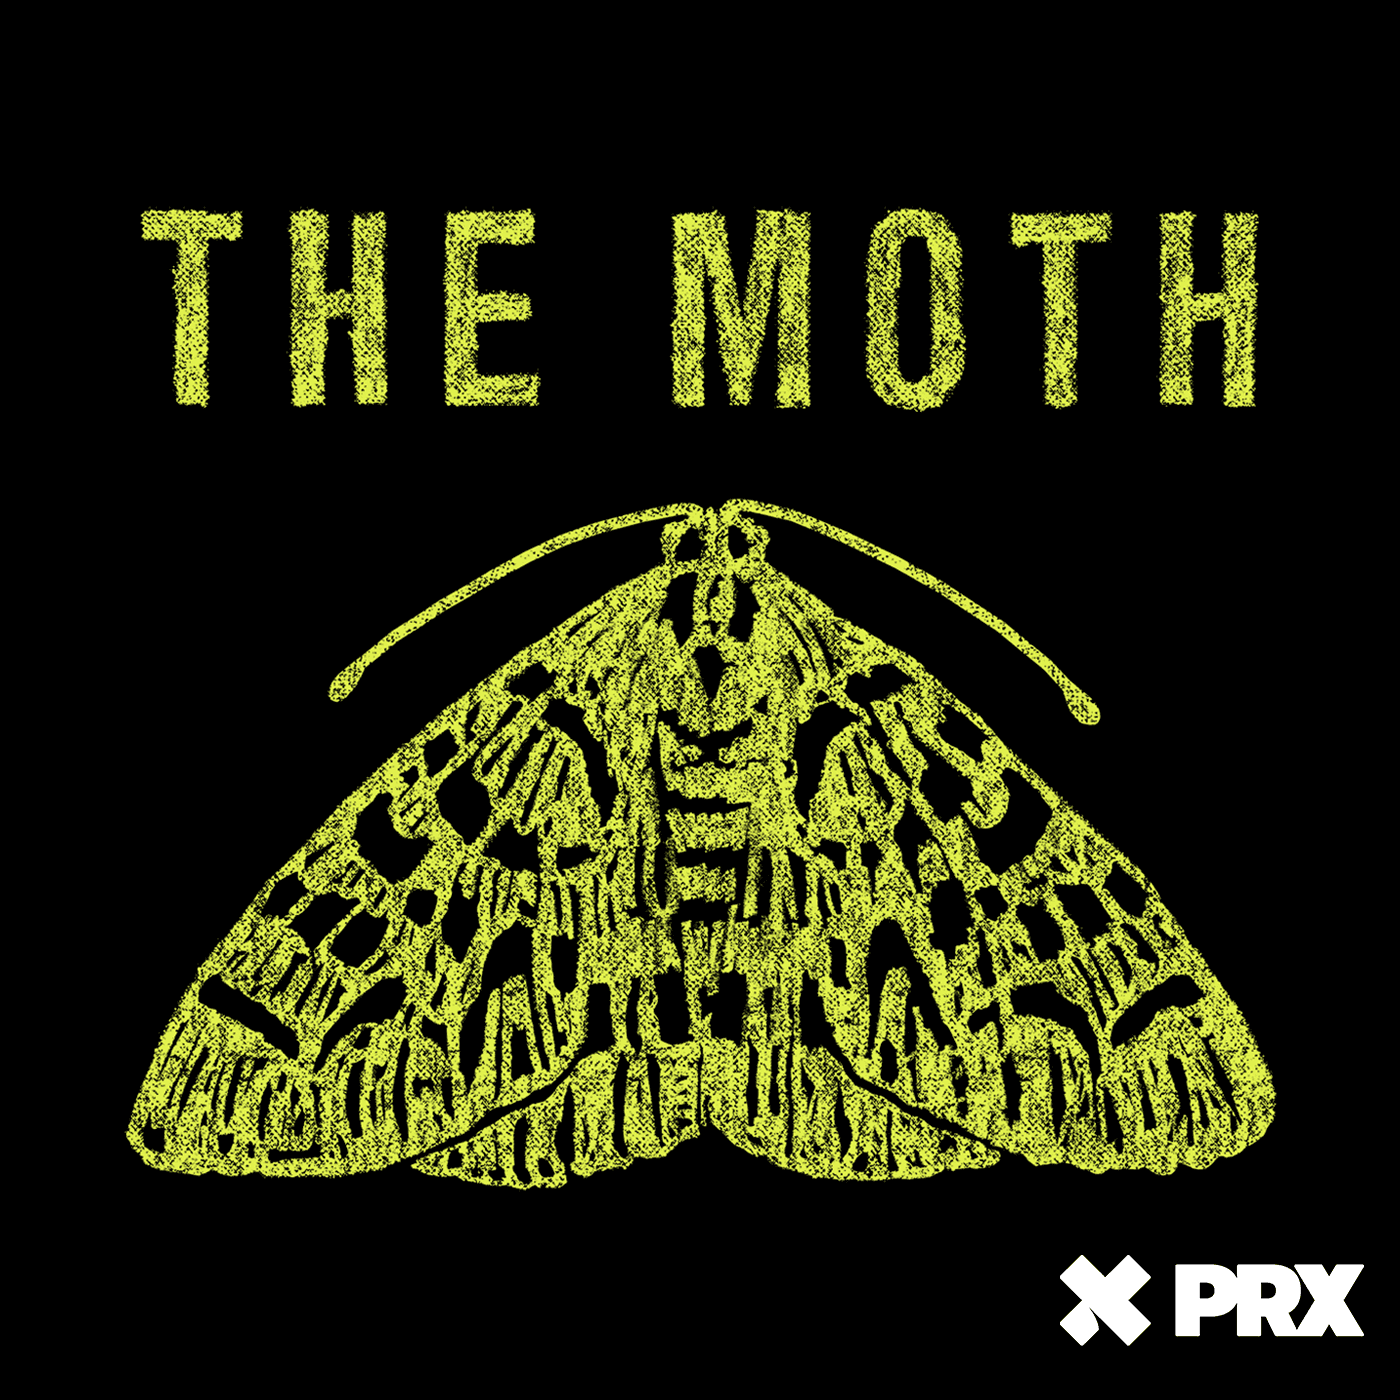 Thumbnail for "The Moth Radio Hour: Driven".